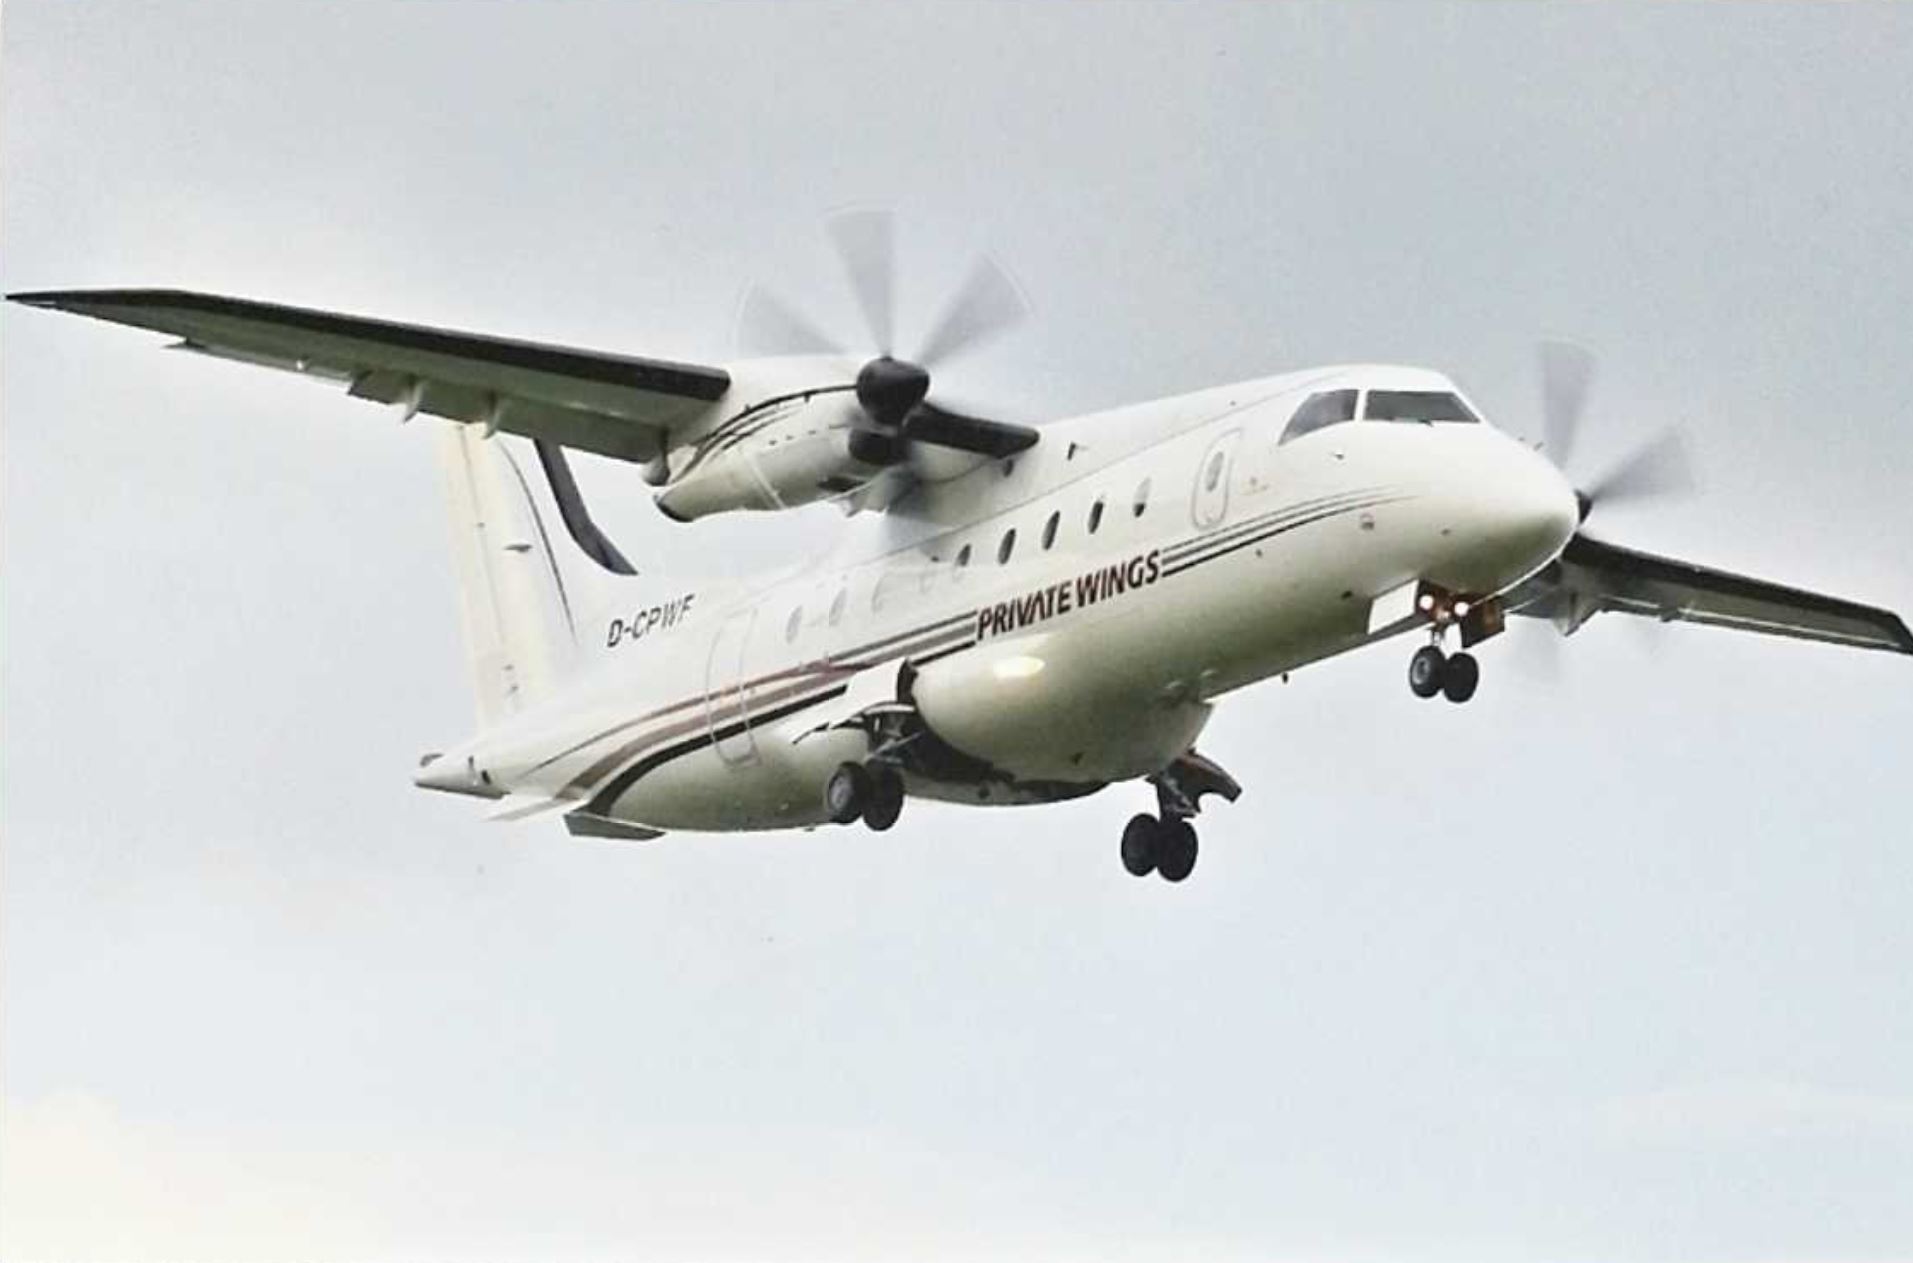 Our first Dornier 328-100 Prop D-CPWF